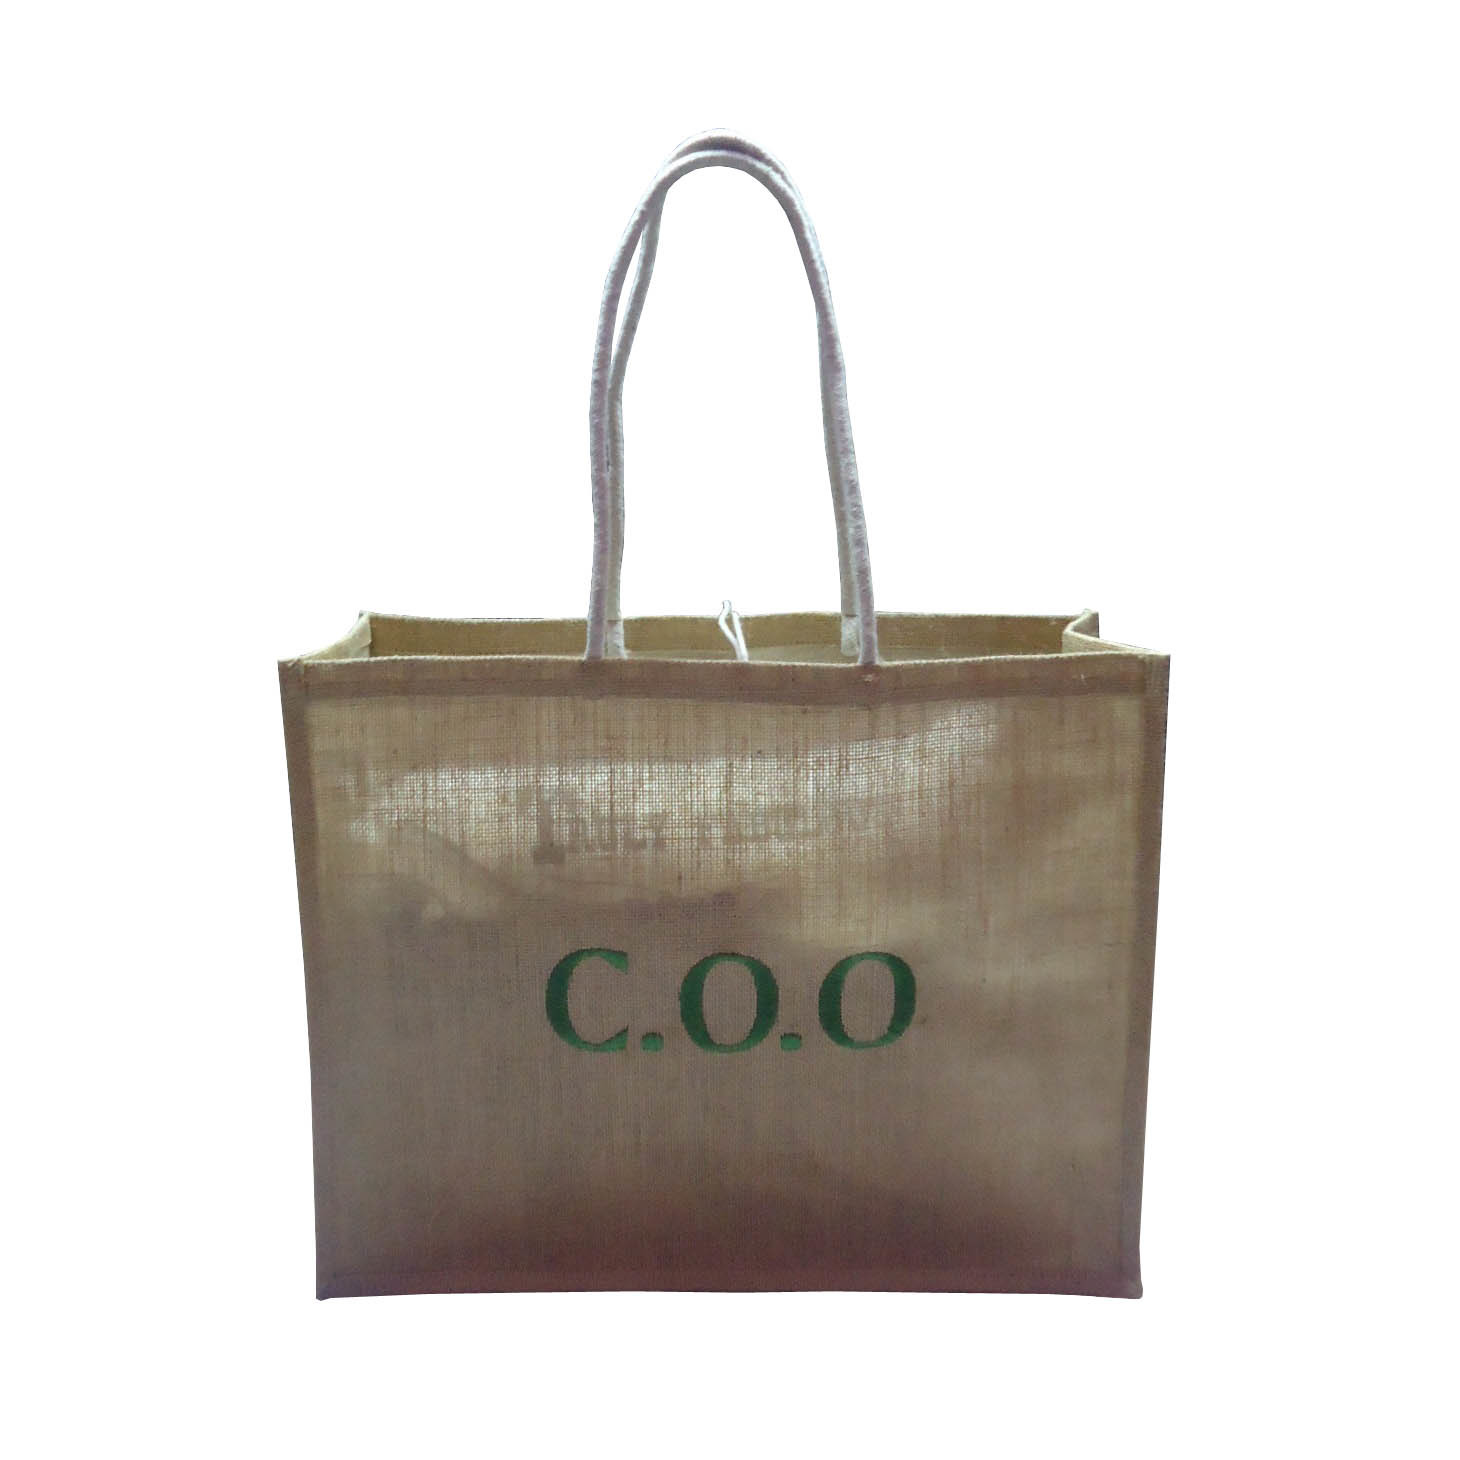 PP Laminated Jute Tote Bag With Front Pocket